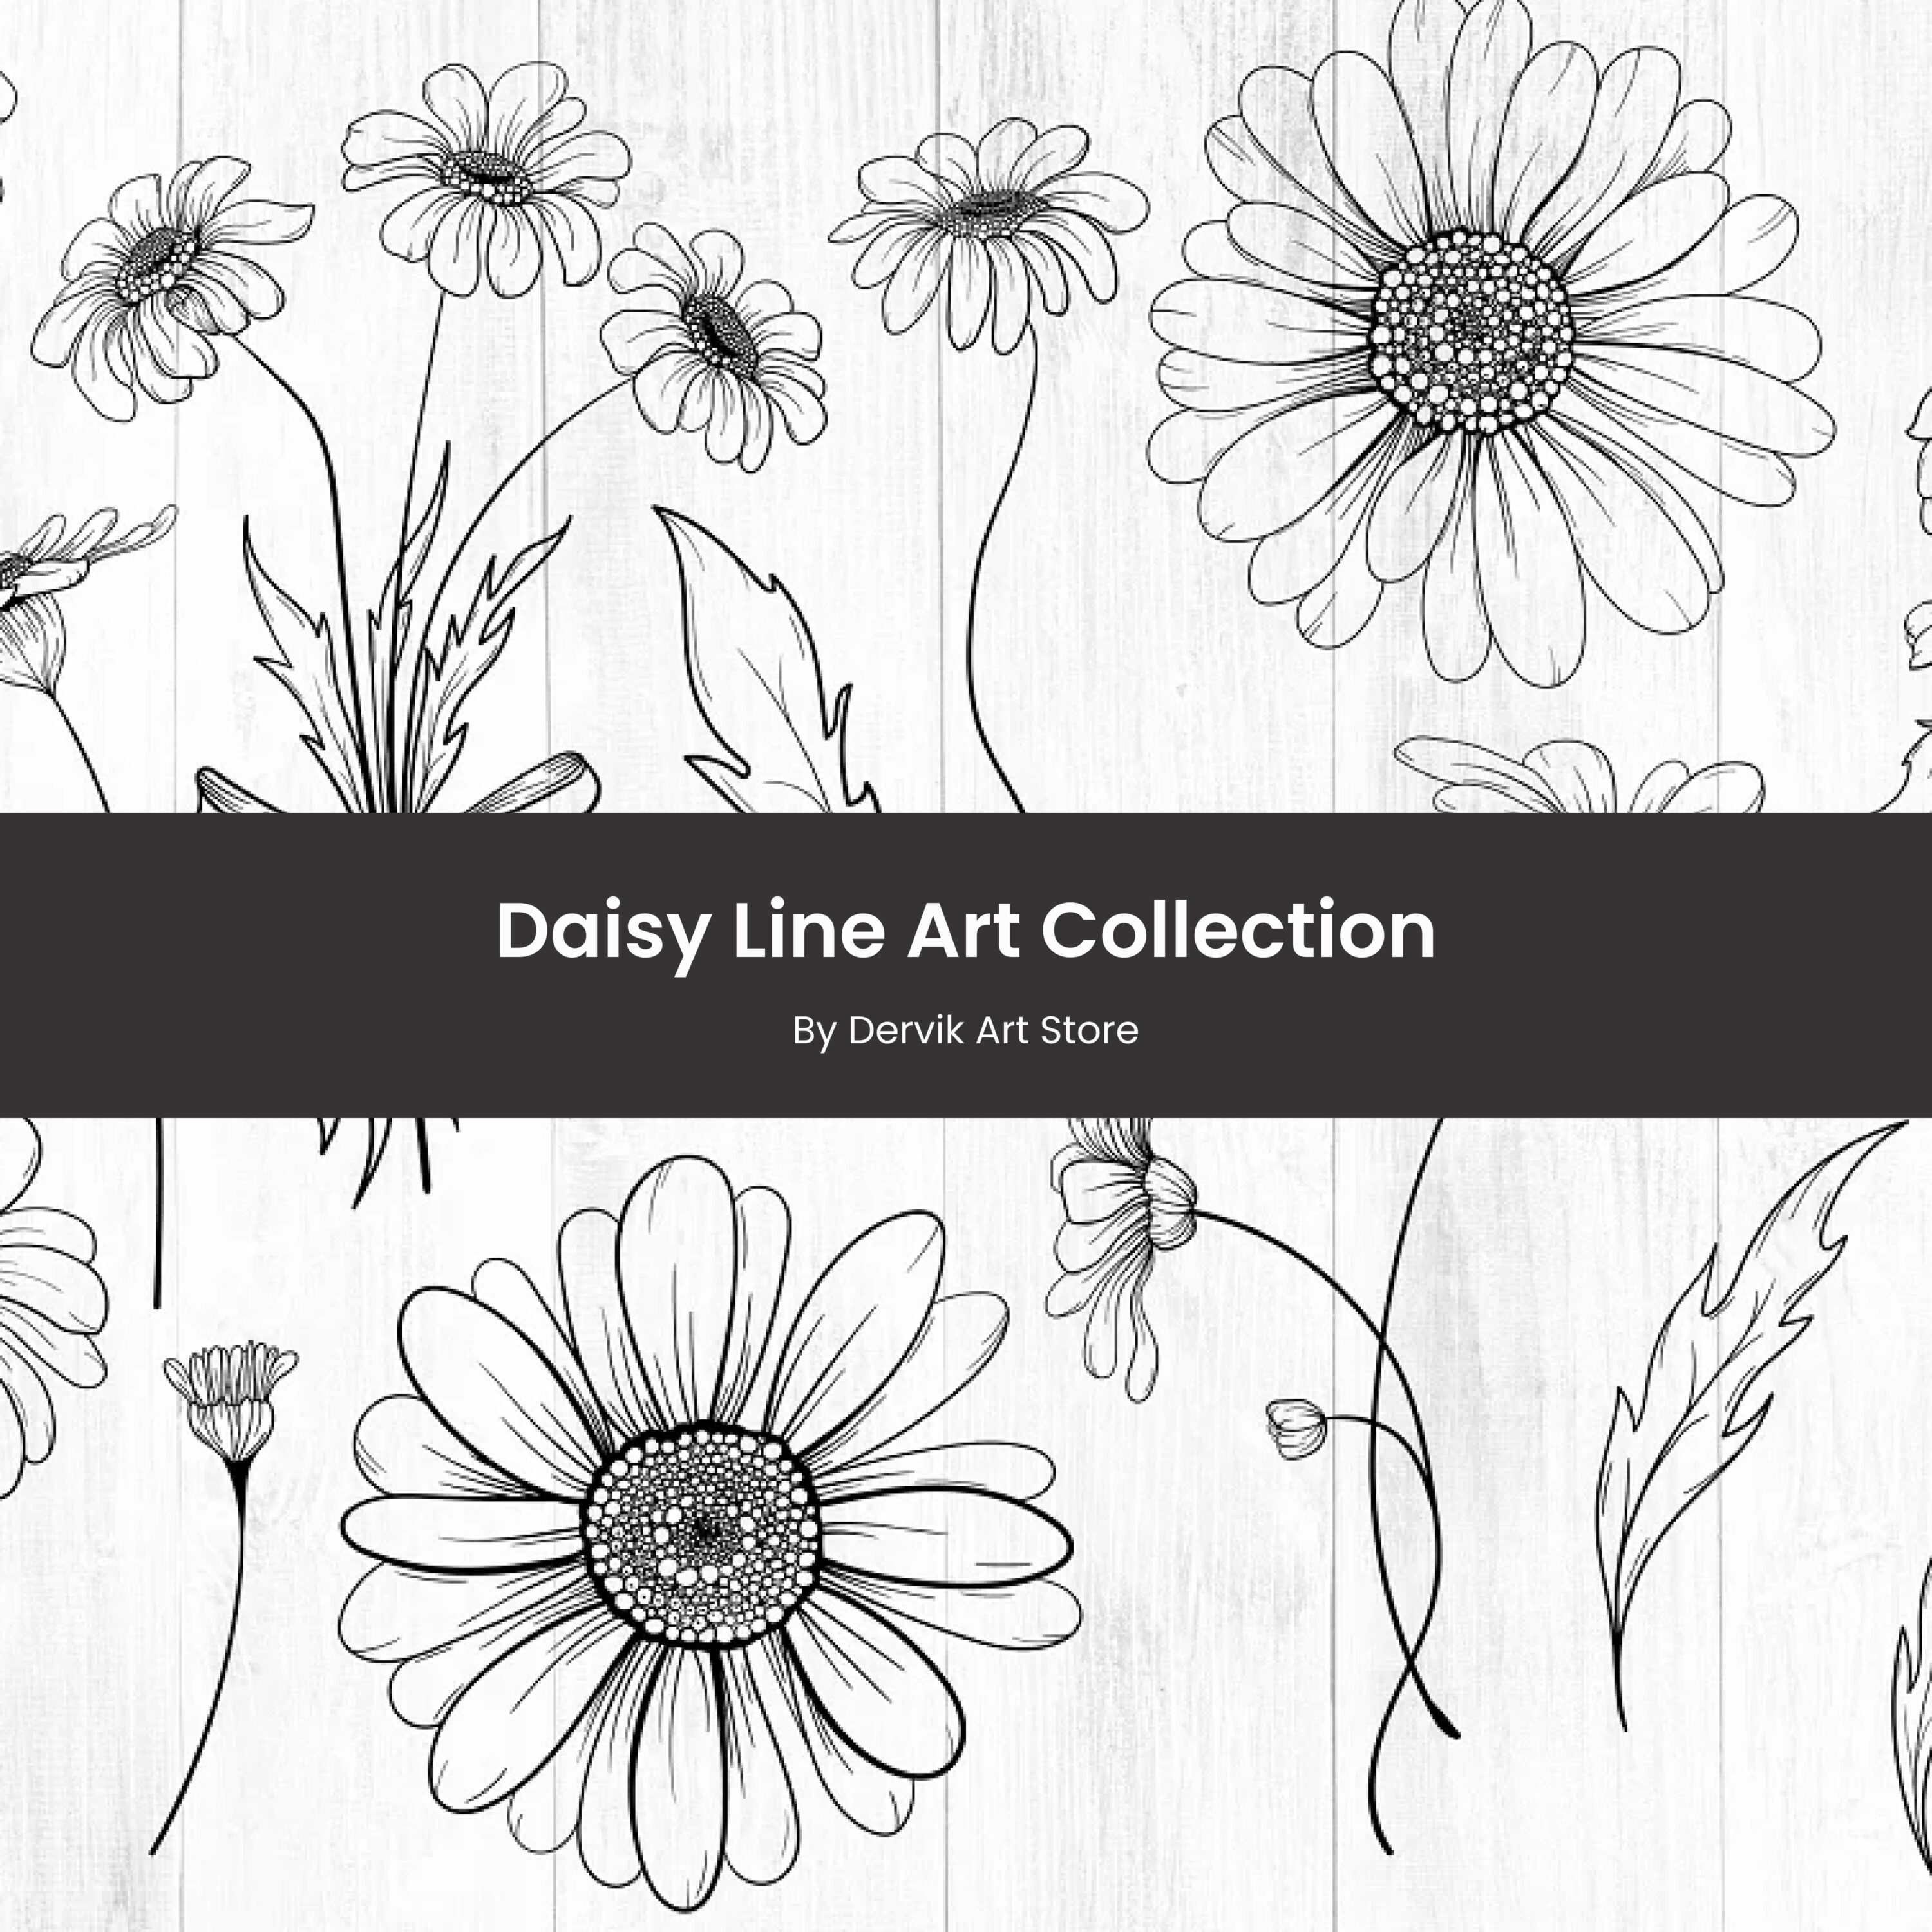 Daisy Line Art Collection.